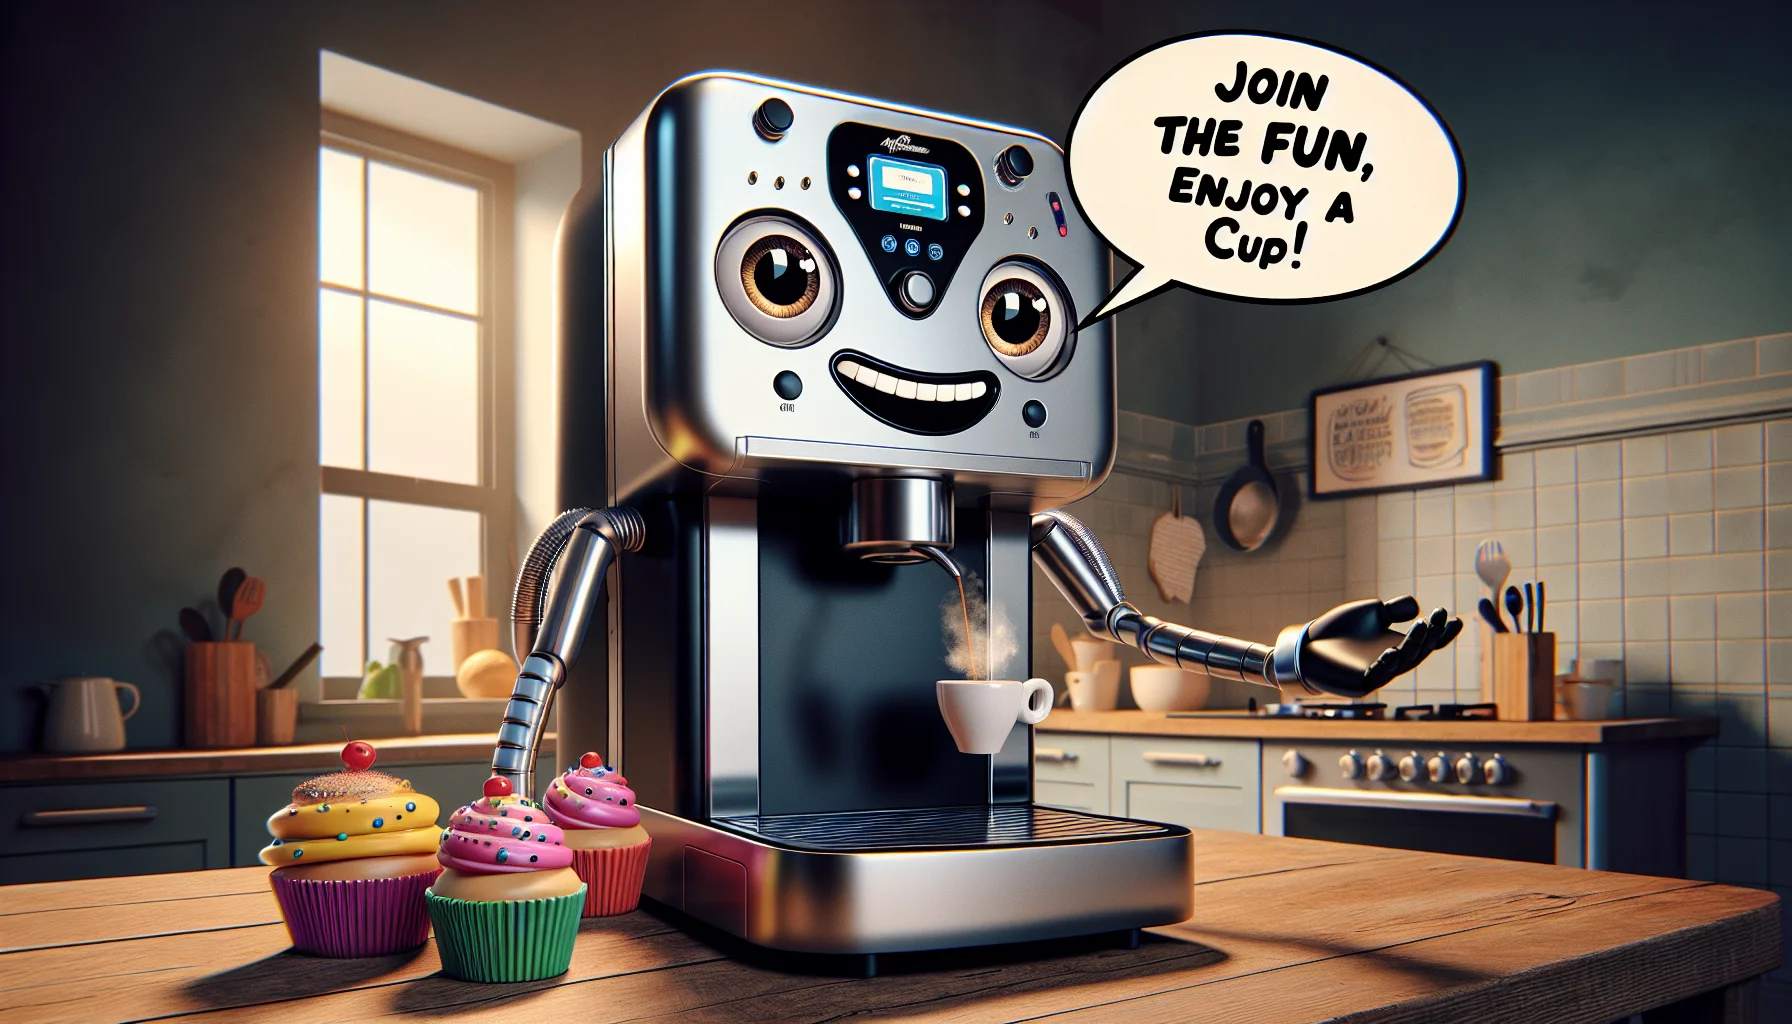 Create a whimsical, hyper-realistic image of an advanced espresso machine standing proudly on a kitchen counter. It has expressive, anthropomorphized features, including gleaming eyes and a broad, inviting smile. The machine's 'arms' are outstretched, presenting a fresh cup of espresso with visible steam wafting up from it. Overhead, the words 'Join the fun, enjoy a cup!' are humorously displayed in a comic-style speech bubble. To add a playful tone, place an array of colorful cupcakes beside the espresso machine, suggesting a chill, jovial coffee break moment.